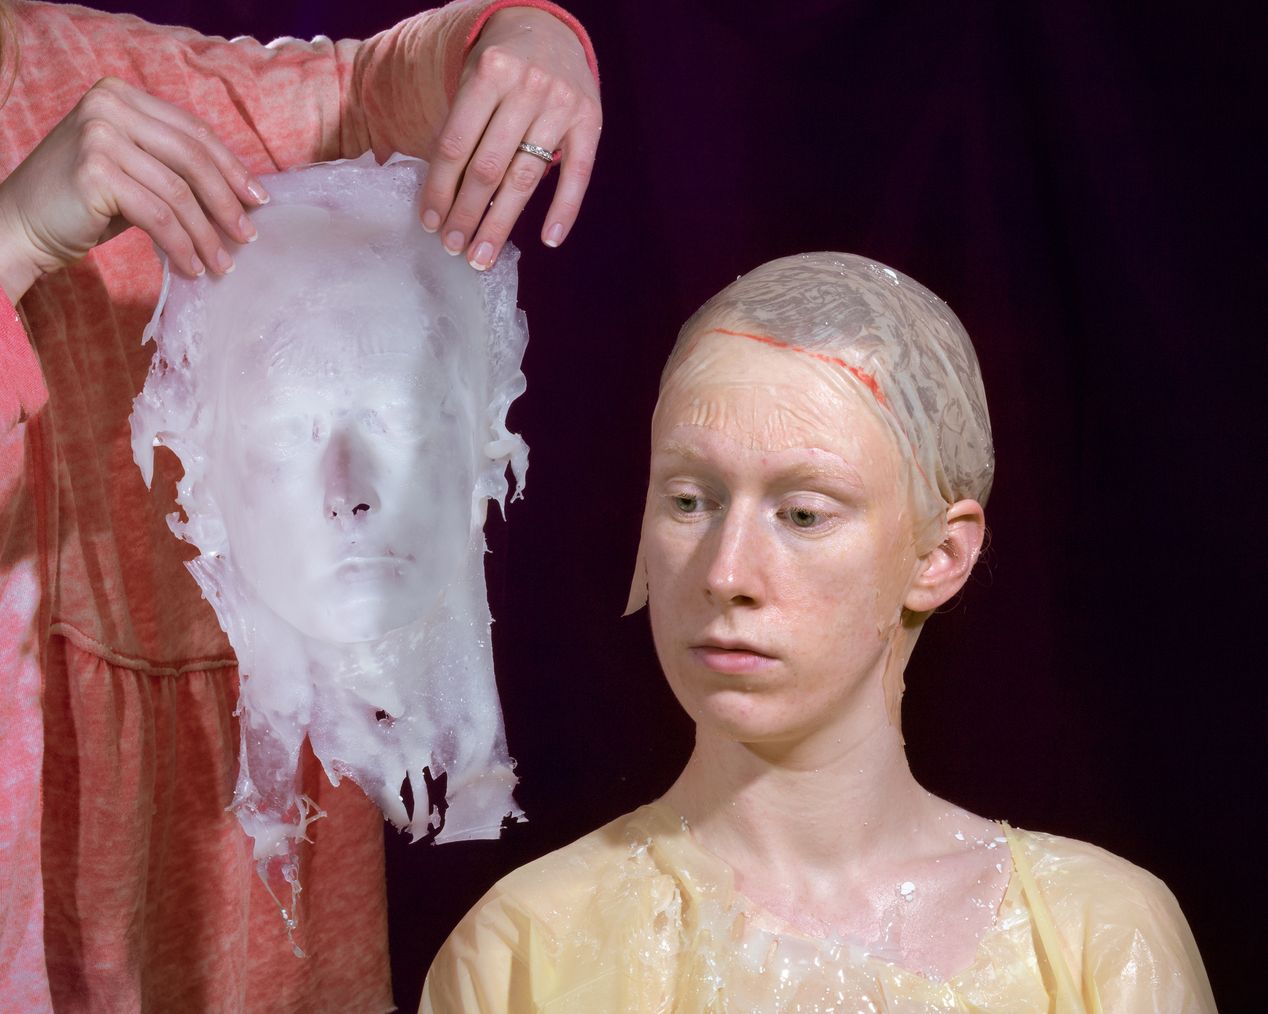 The reverse of the silicone mask is placed near the model's face, art photography, Ilona Szwarc, contemporary Los Angeles artist.